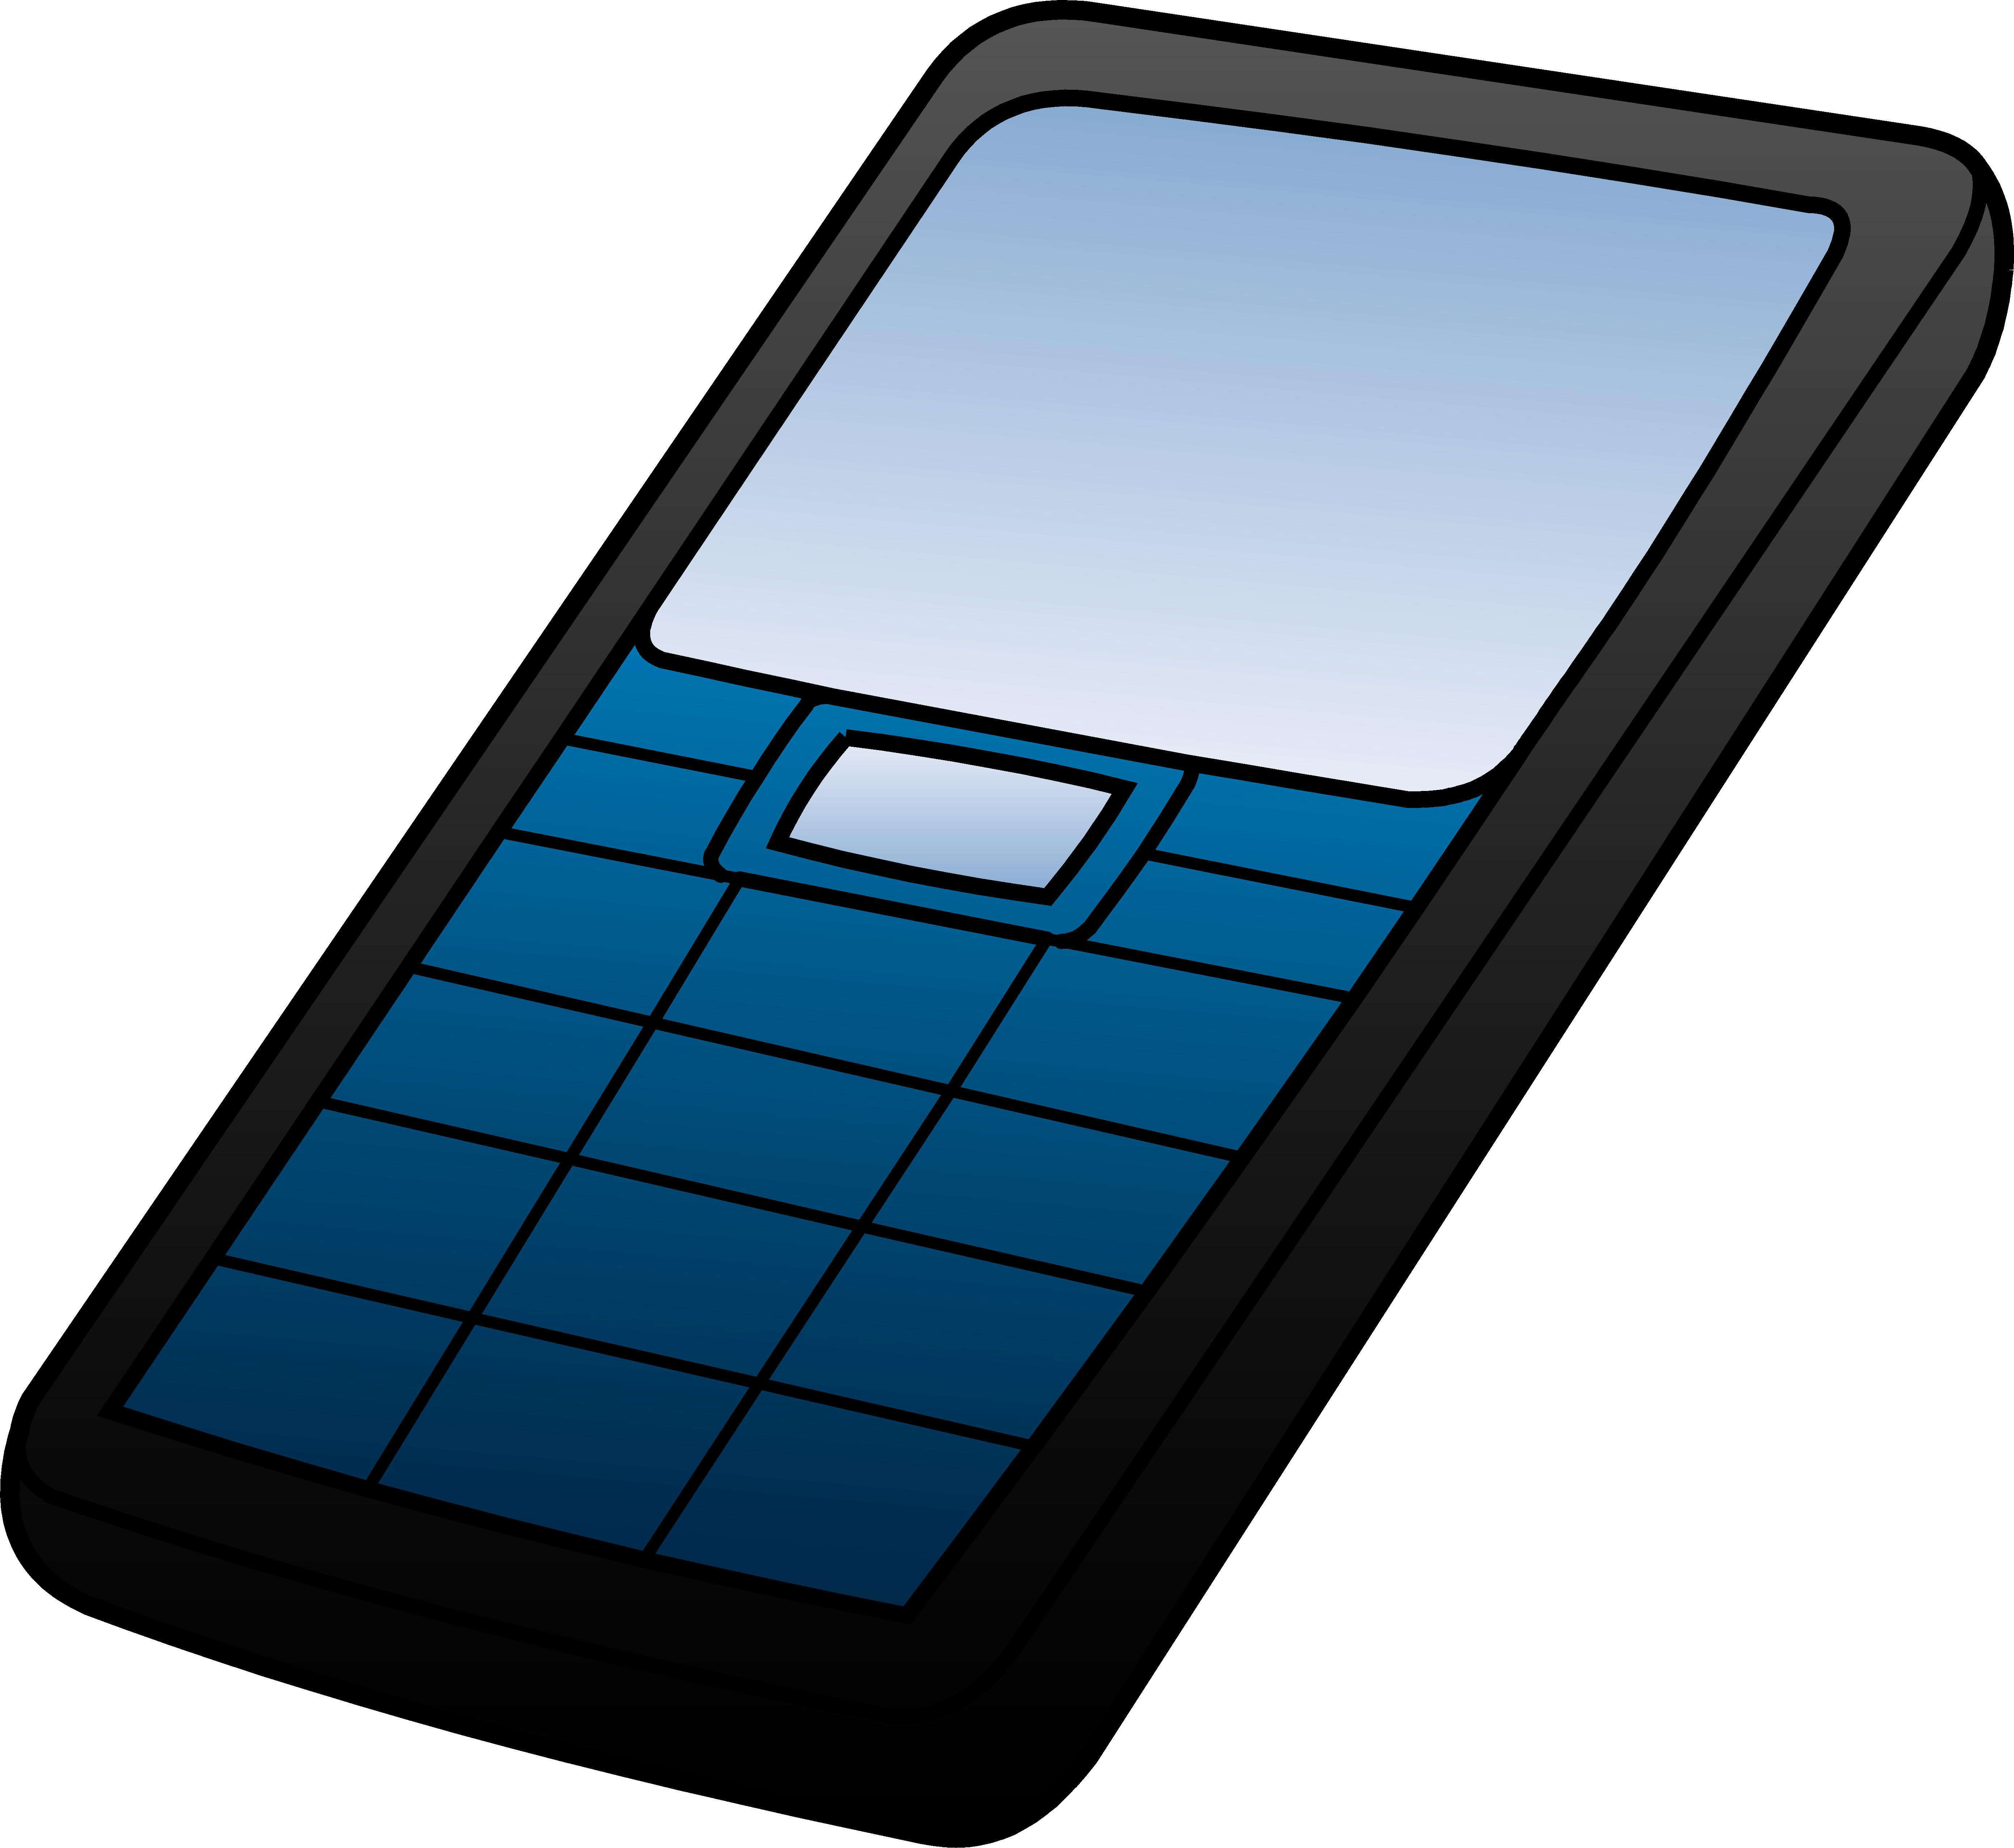 Cell Phone Hd Image Clipart